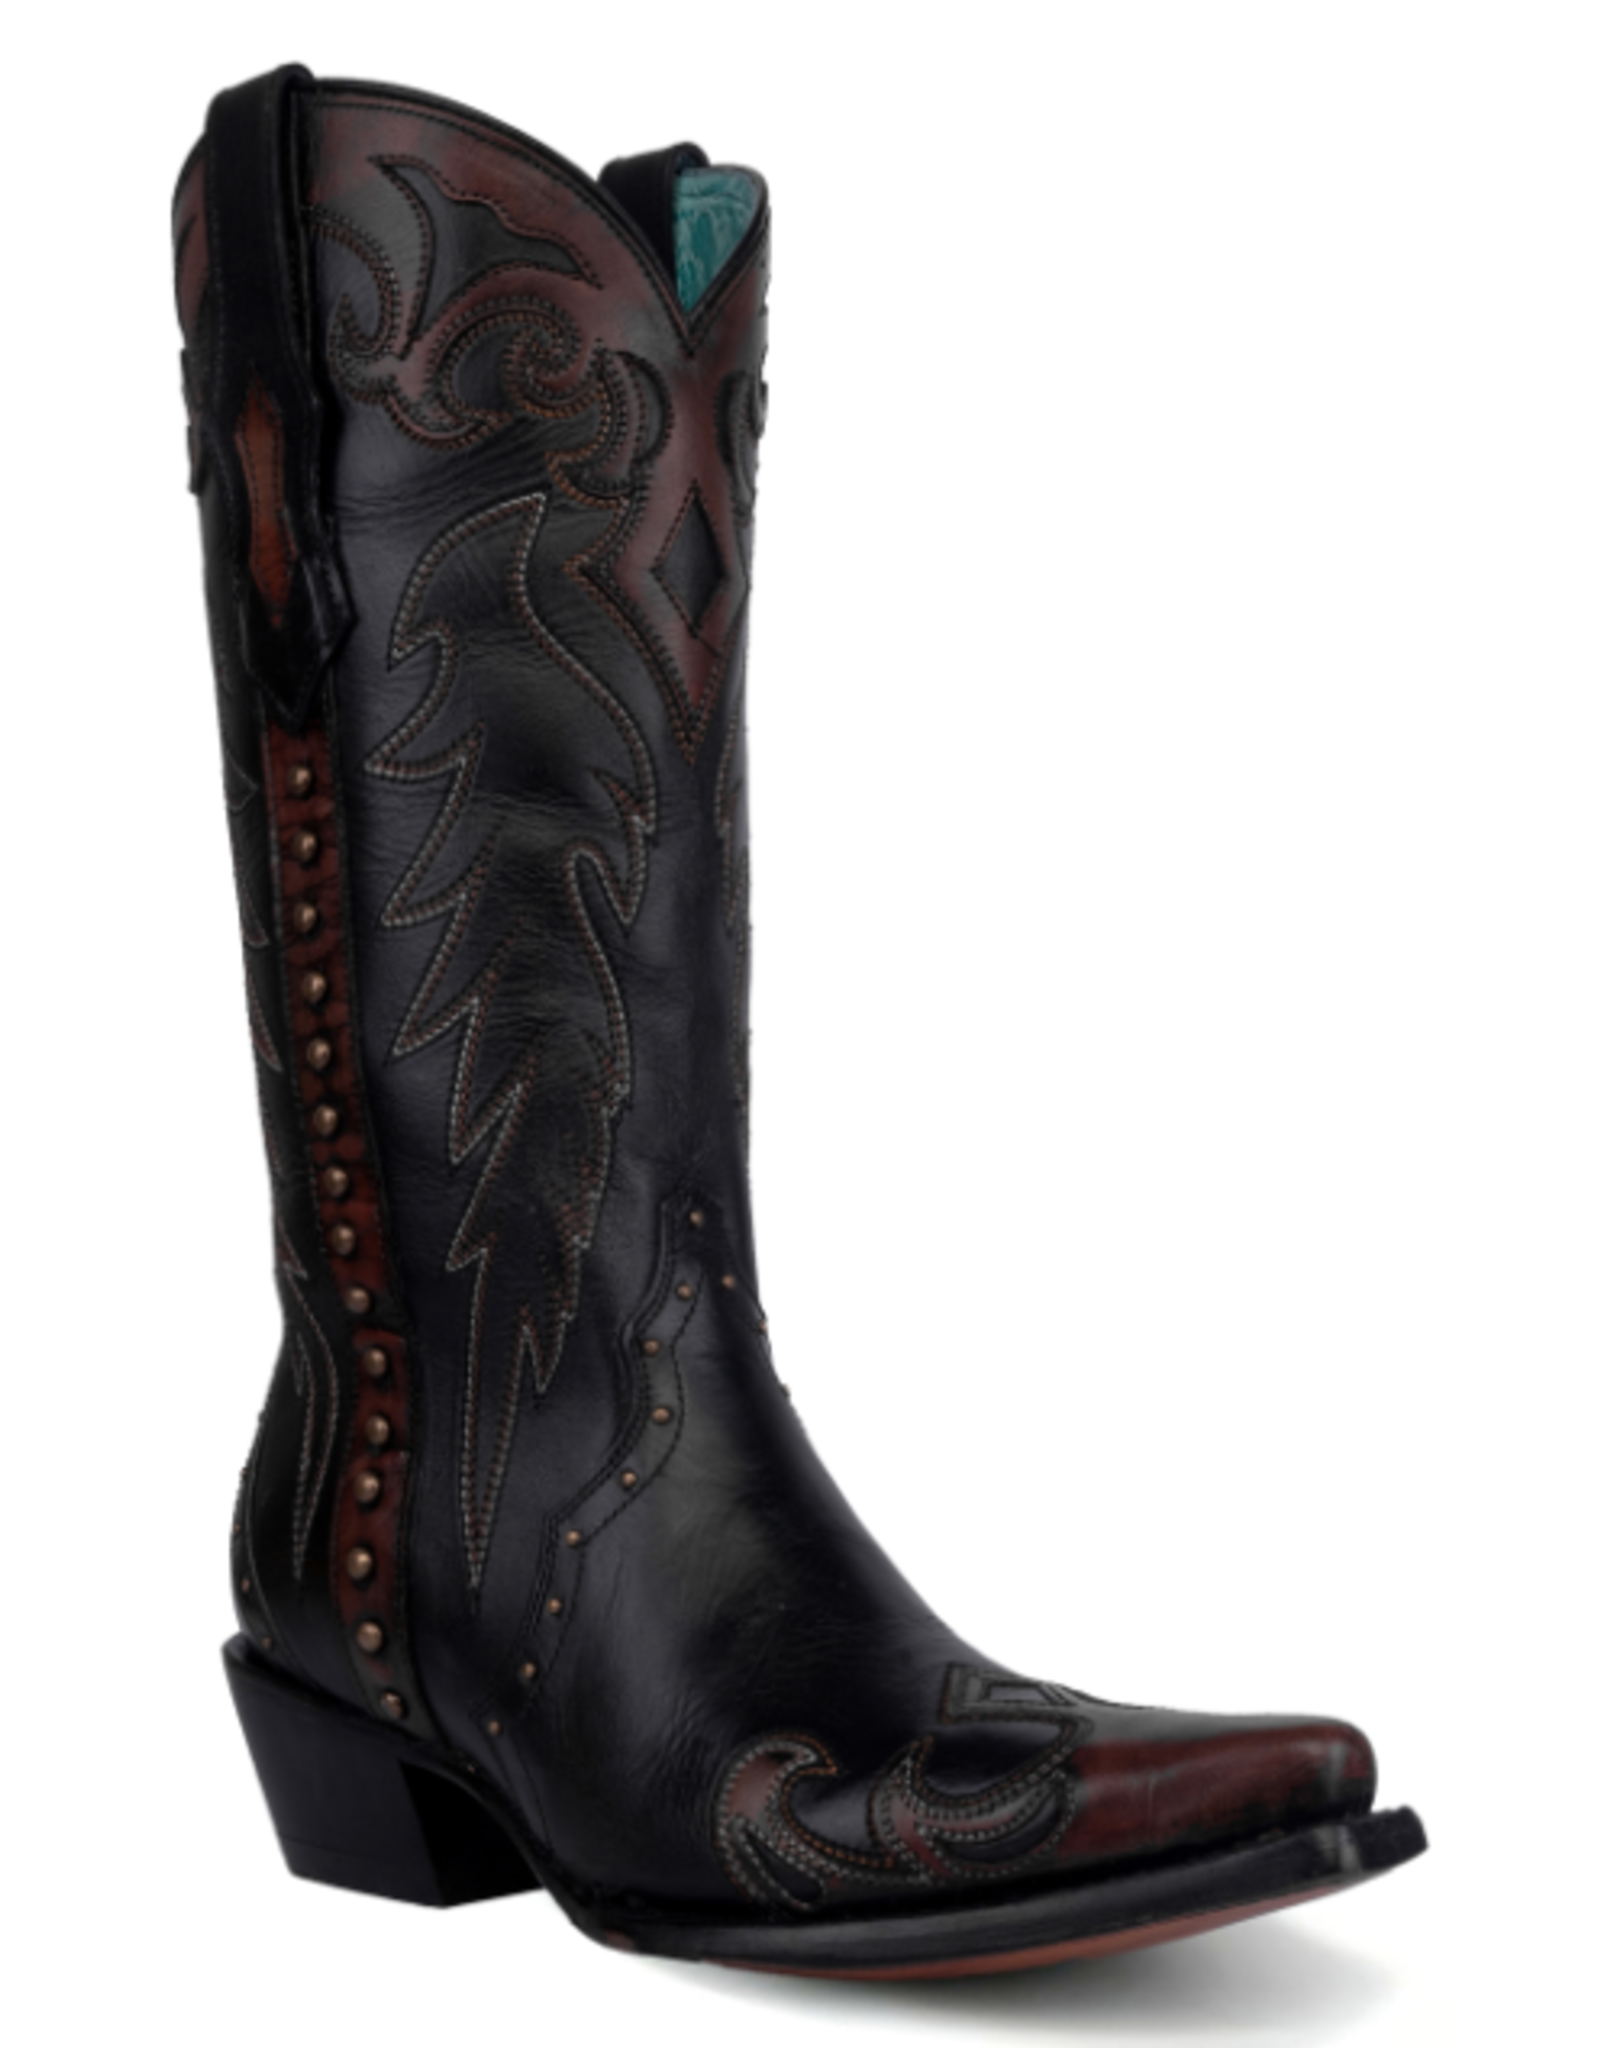 Corral Ladies Black/Cognac Embroidery & Studs F1352 Western Boots